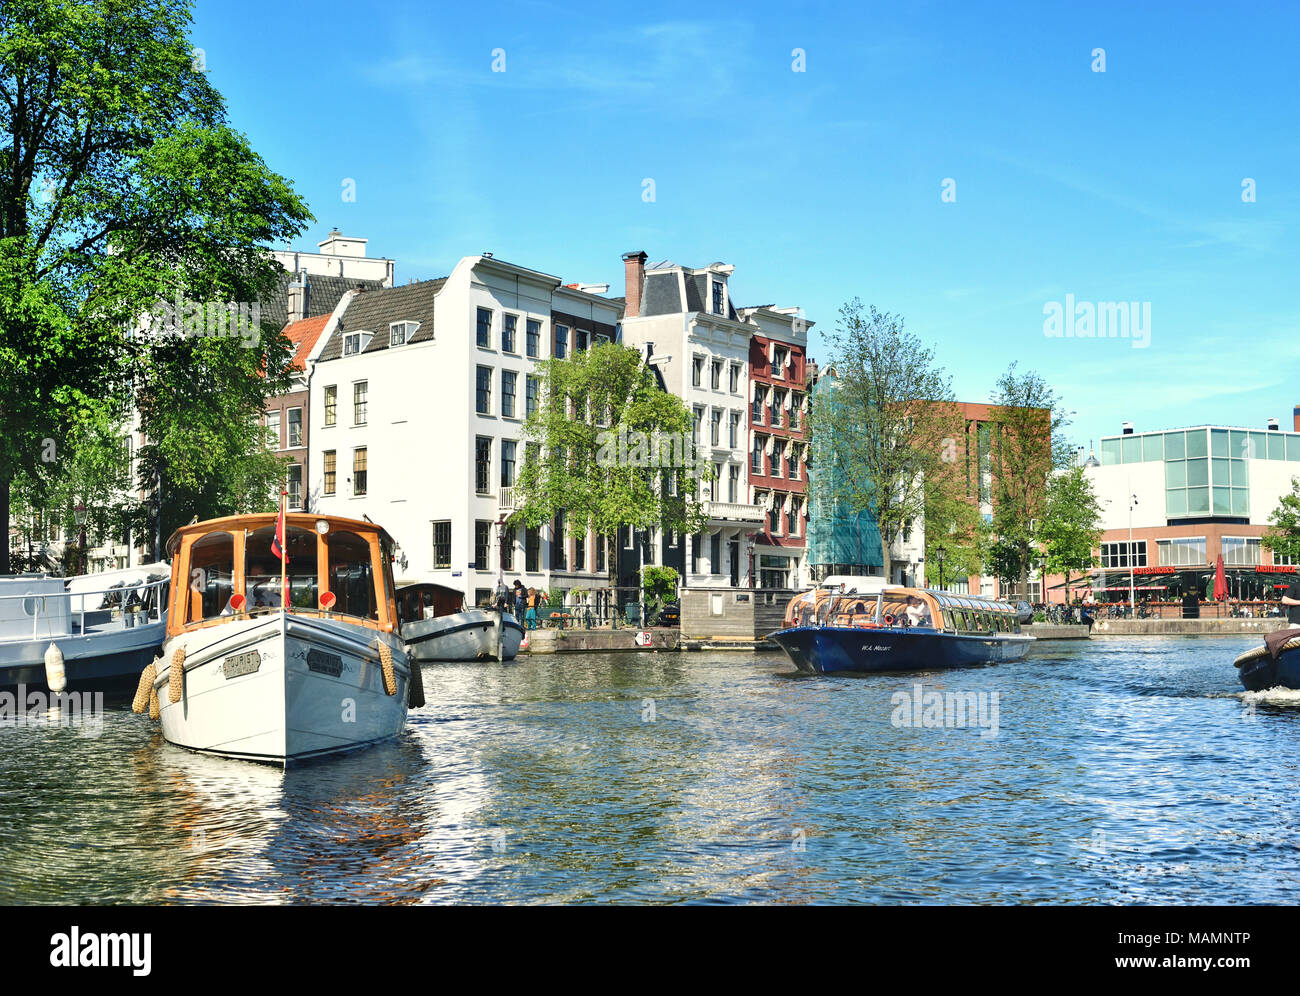 Canal or gracht in Amsterdam city. Amstel river scene with boats and old houses. Stock Photo